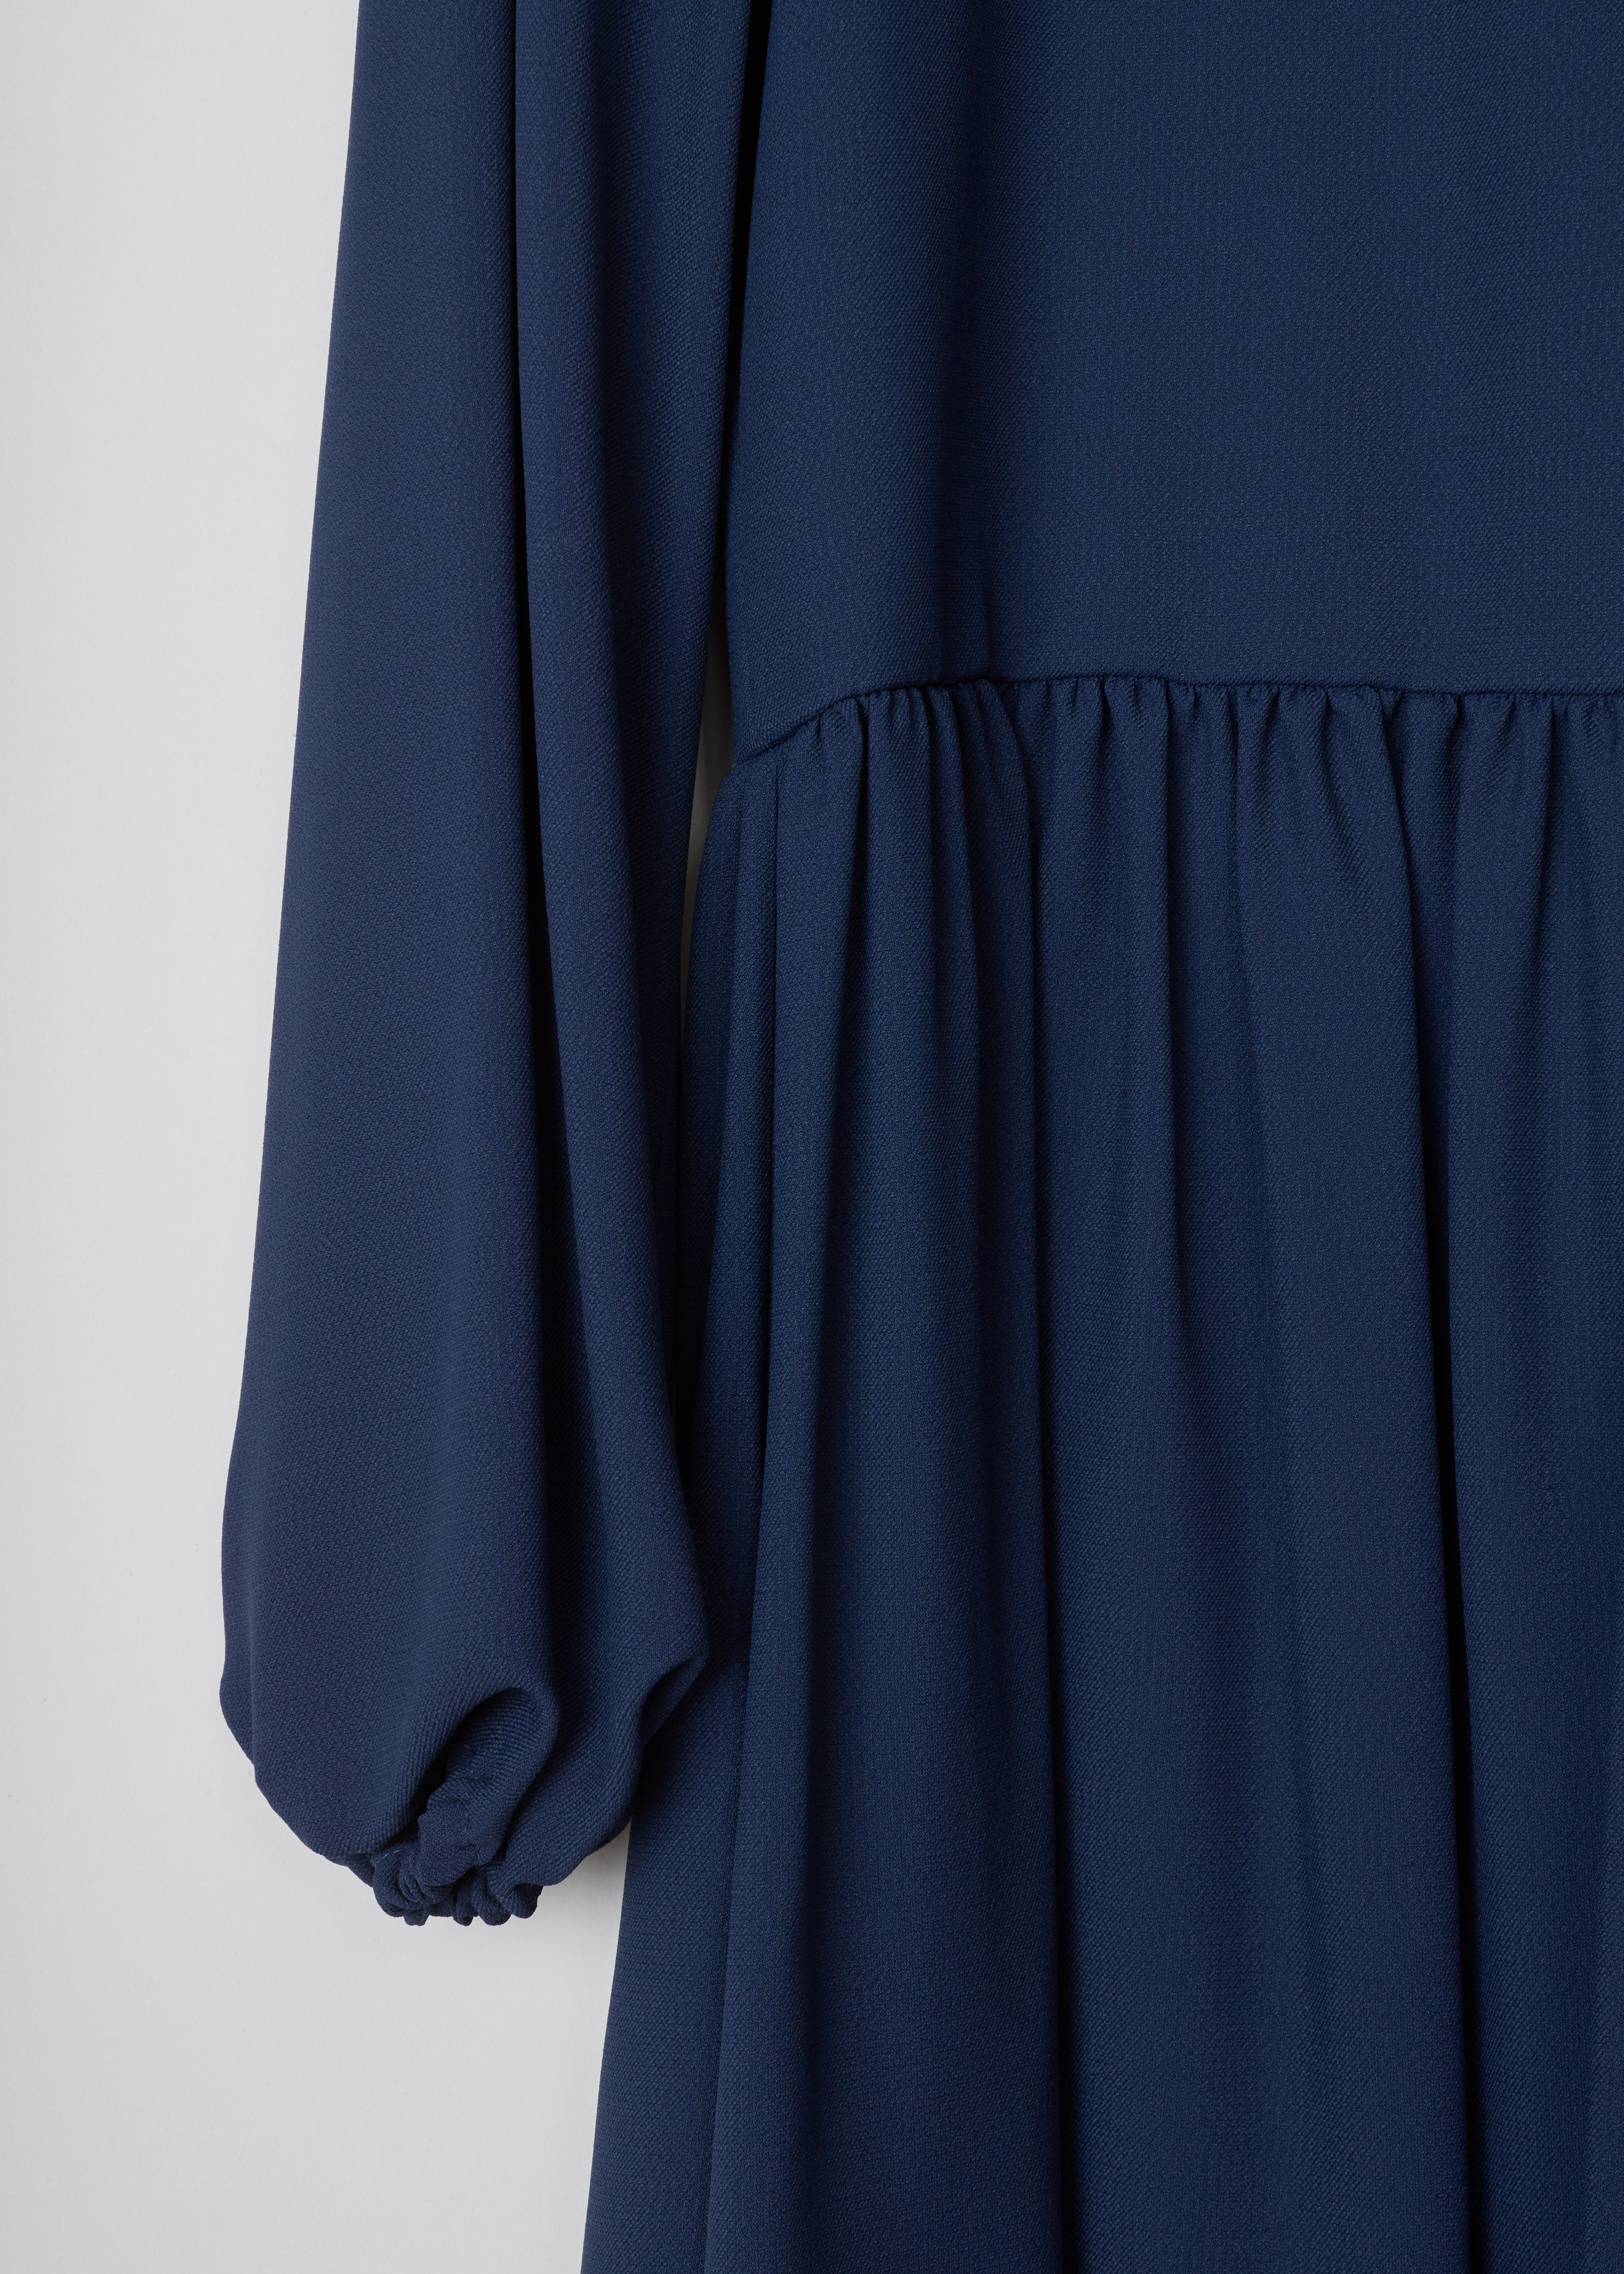 ChloÃ© Gathered deep blue dress 17SRO65_17S37_7B5 deep blue detail. Deep blue dress with a V-neck. This model has loose sleeves and gathered cuffs. The straight cut has small pleats around the waist and a midi length. As closure this dress has an invisible zipper on the side.